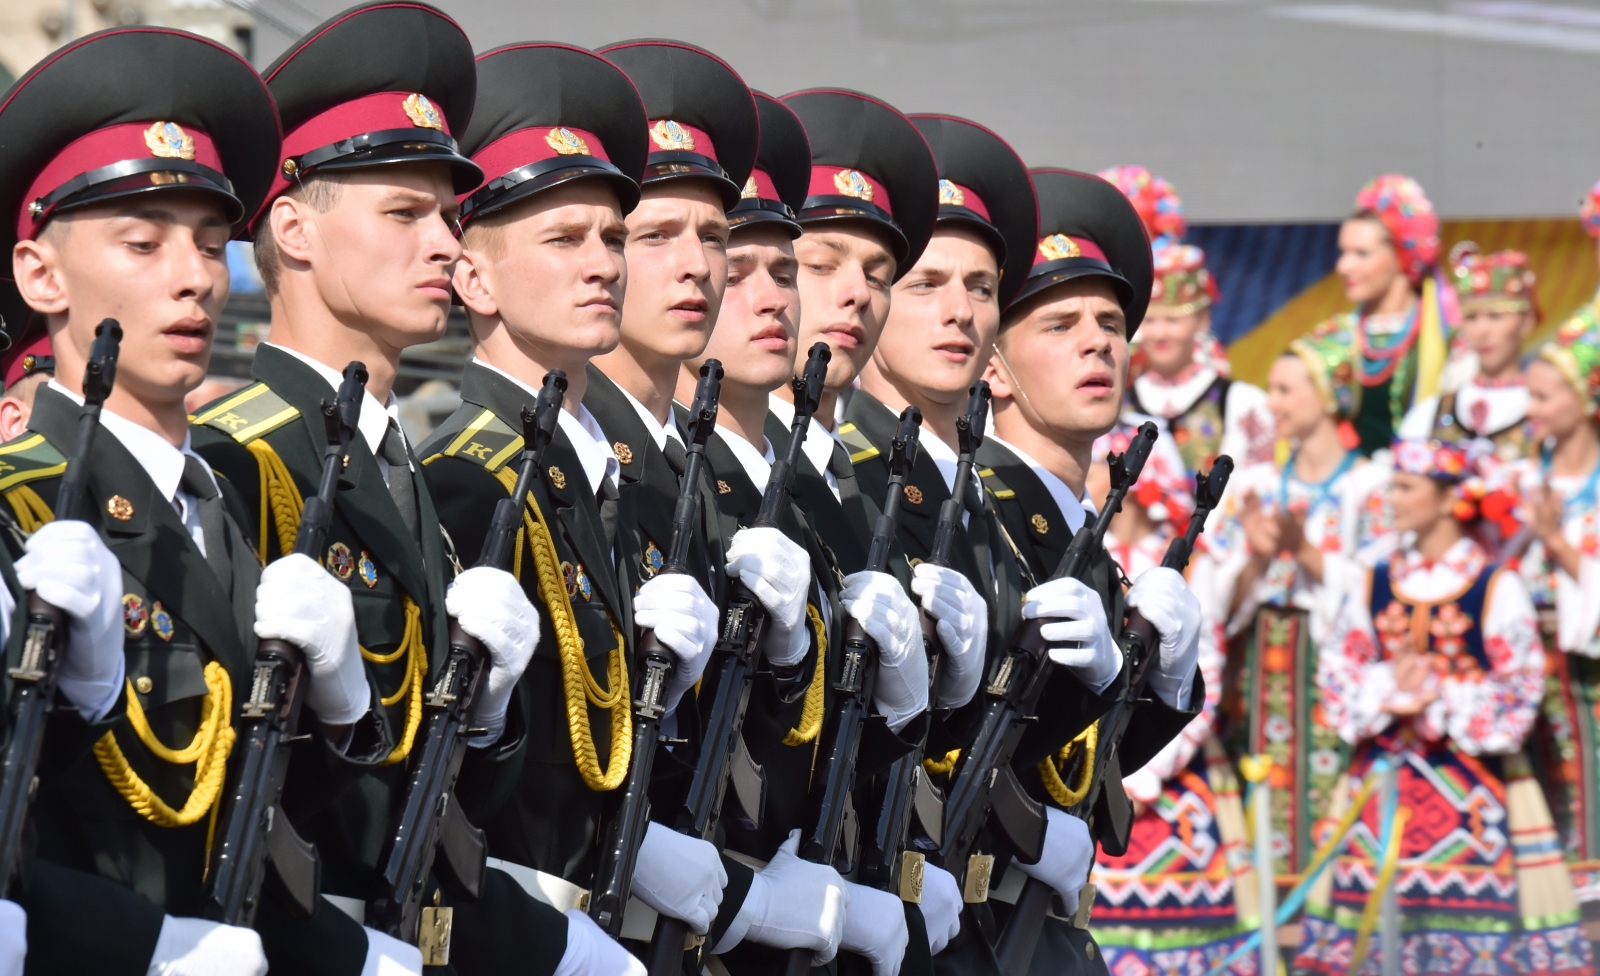 Ukraine Independence Day Parade row soldiers